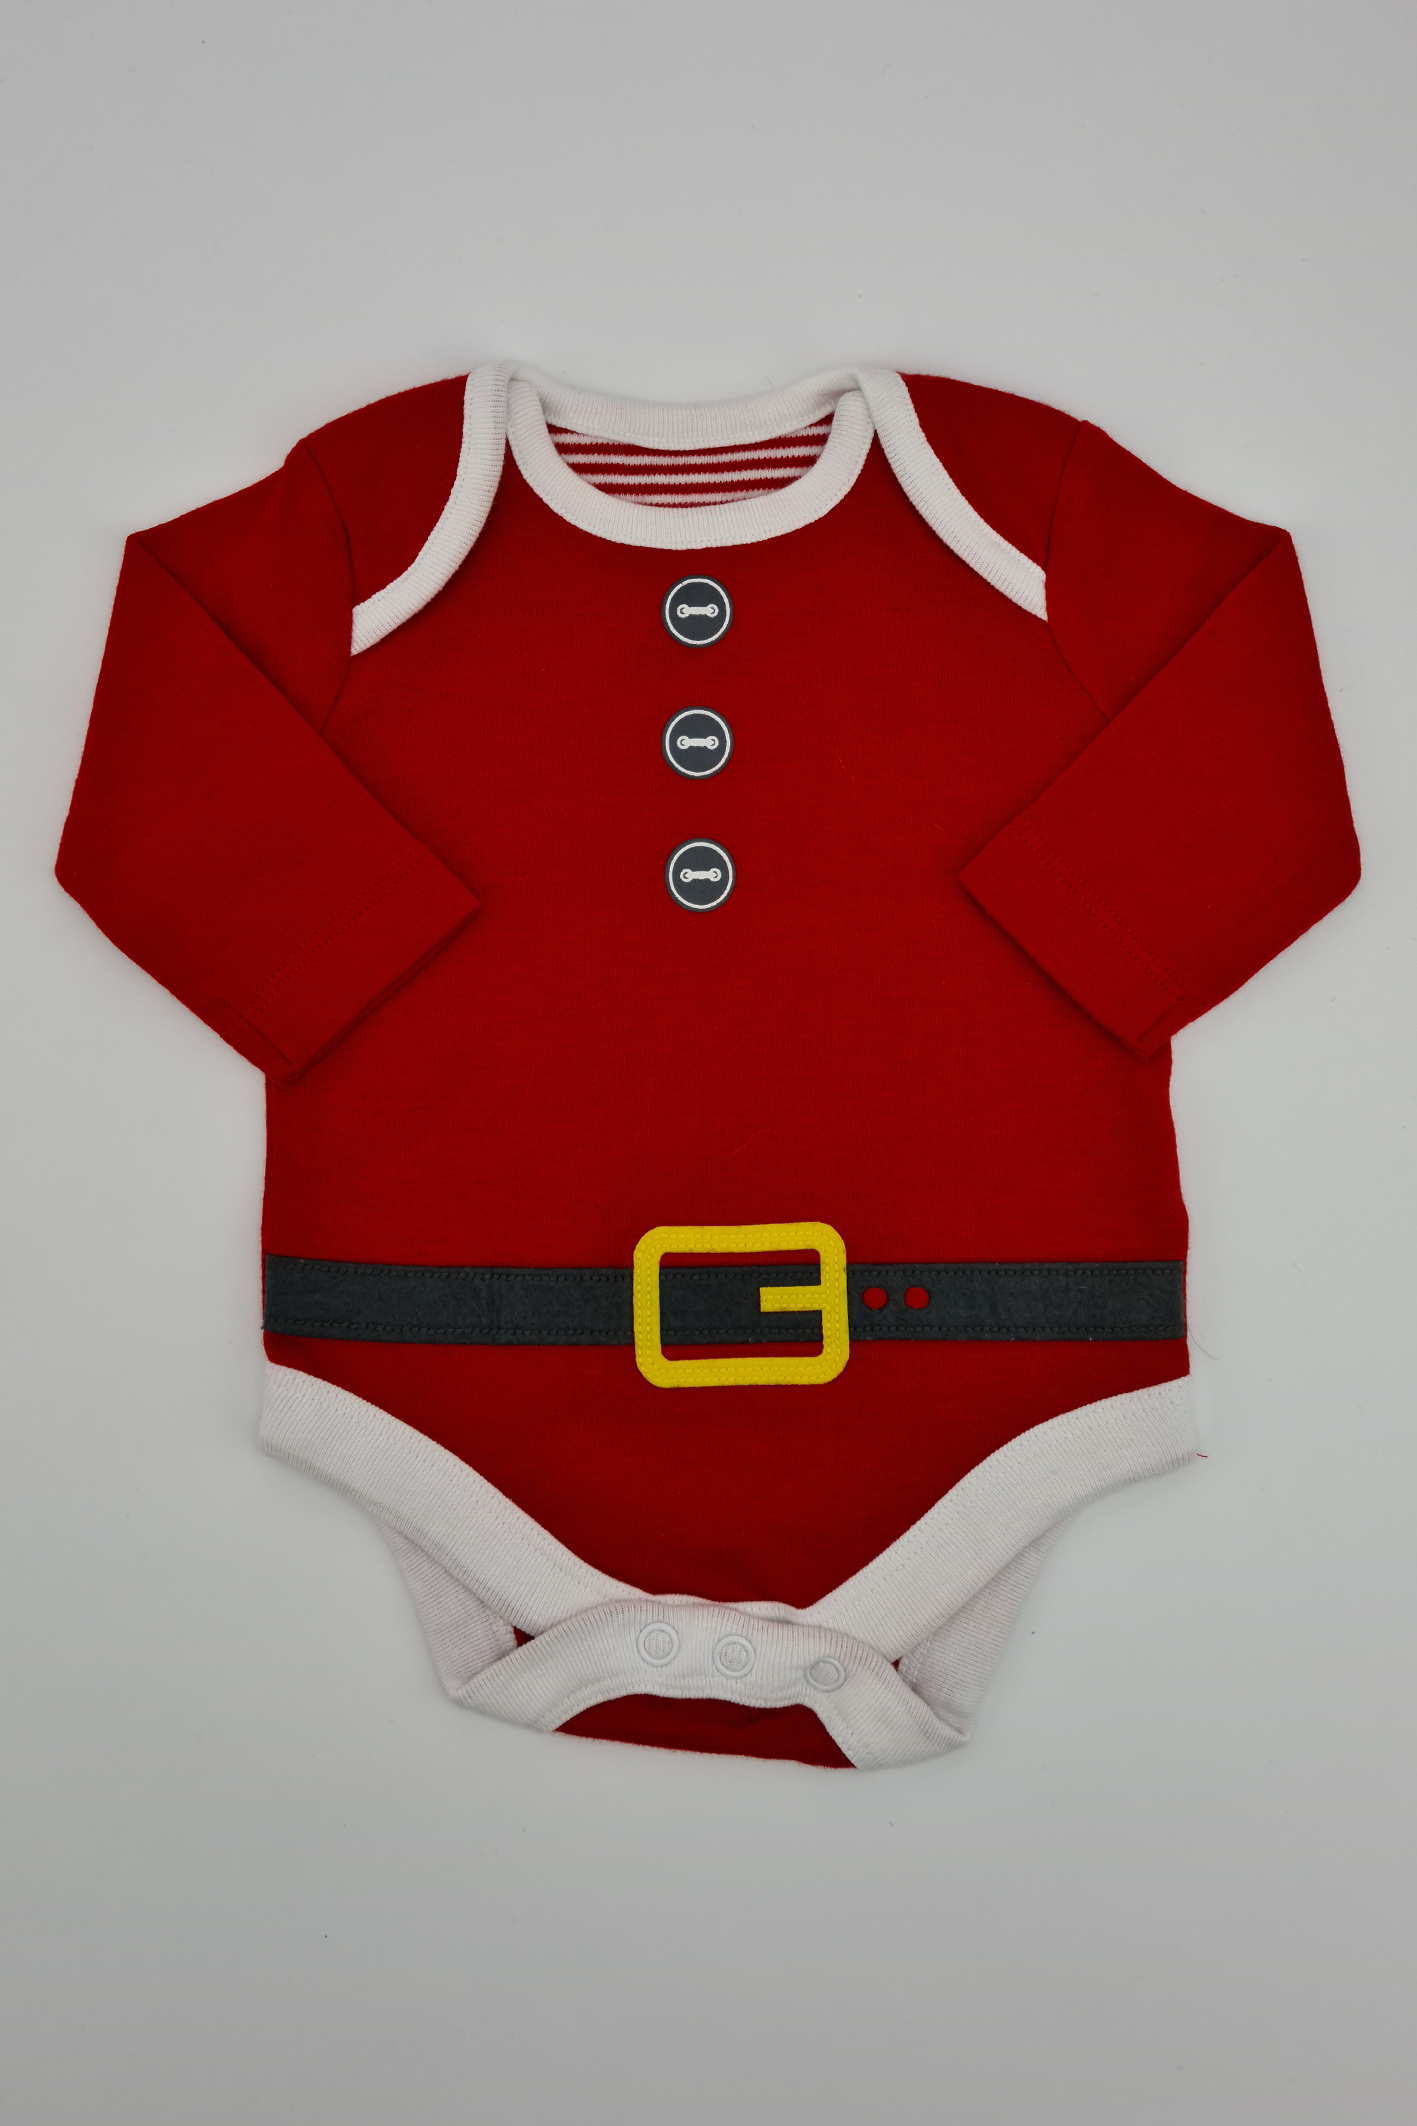 1 m (10 lbs) – Weihnachtsmann-Body (Mothercare)